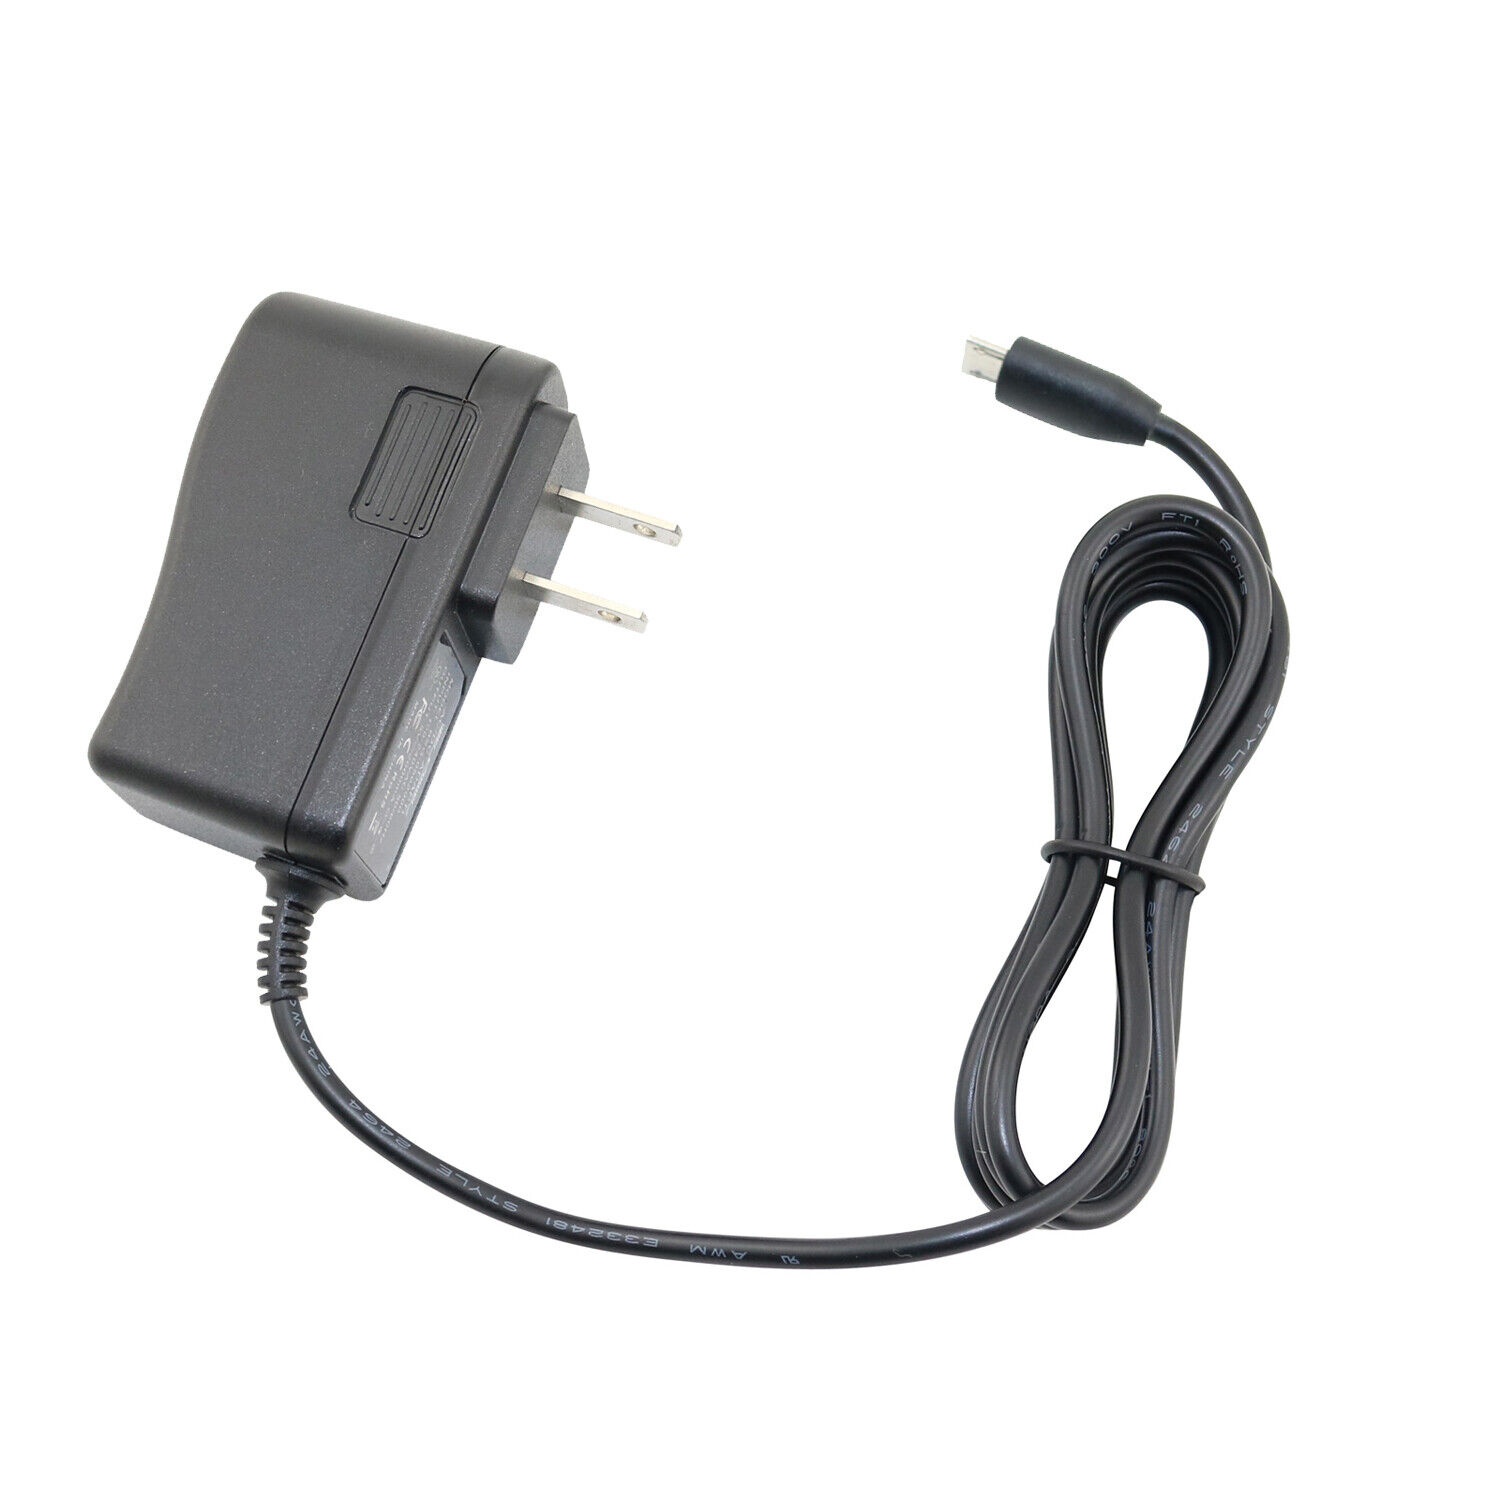 *Brand NEW* Charger for Polaroid ZIP Mobile Printer AC/DC Adapter Power Supply Cord